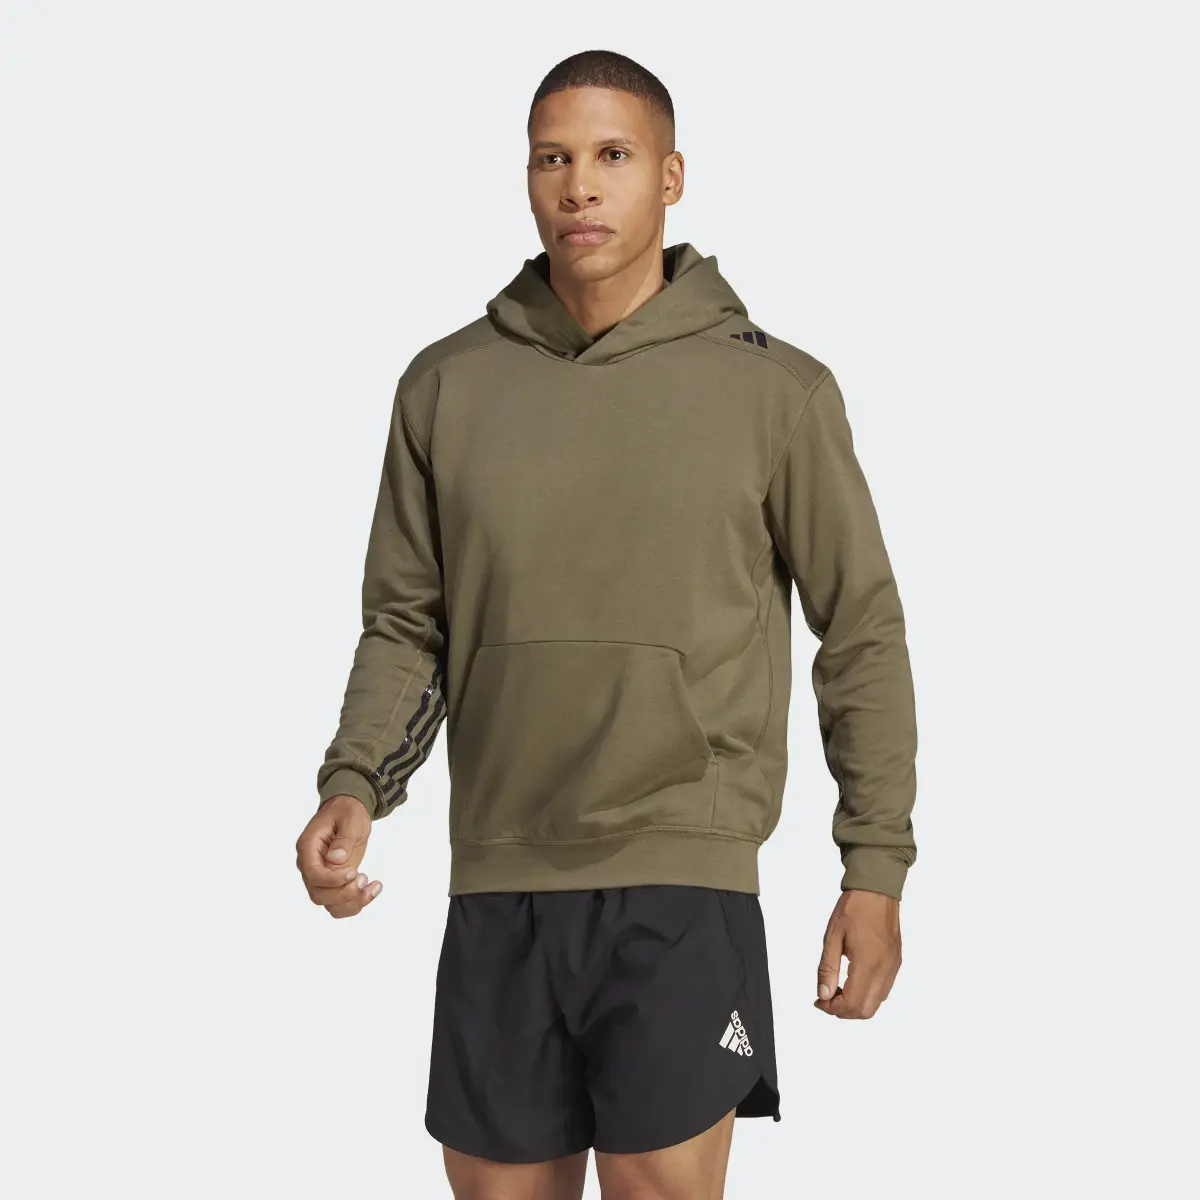 Adidas Curated by Cody Rigsby HIIT Hoodie. 2